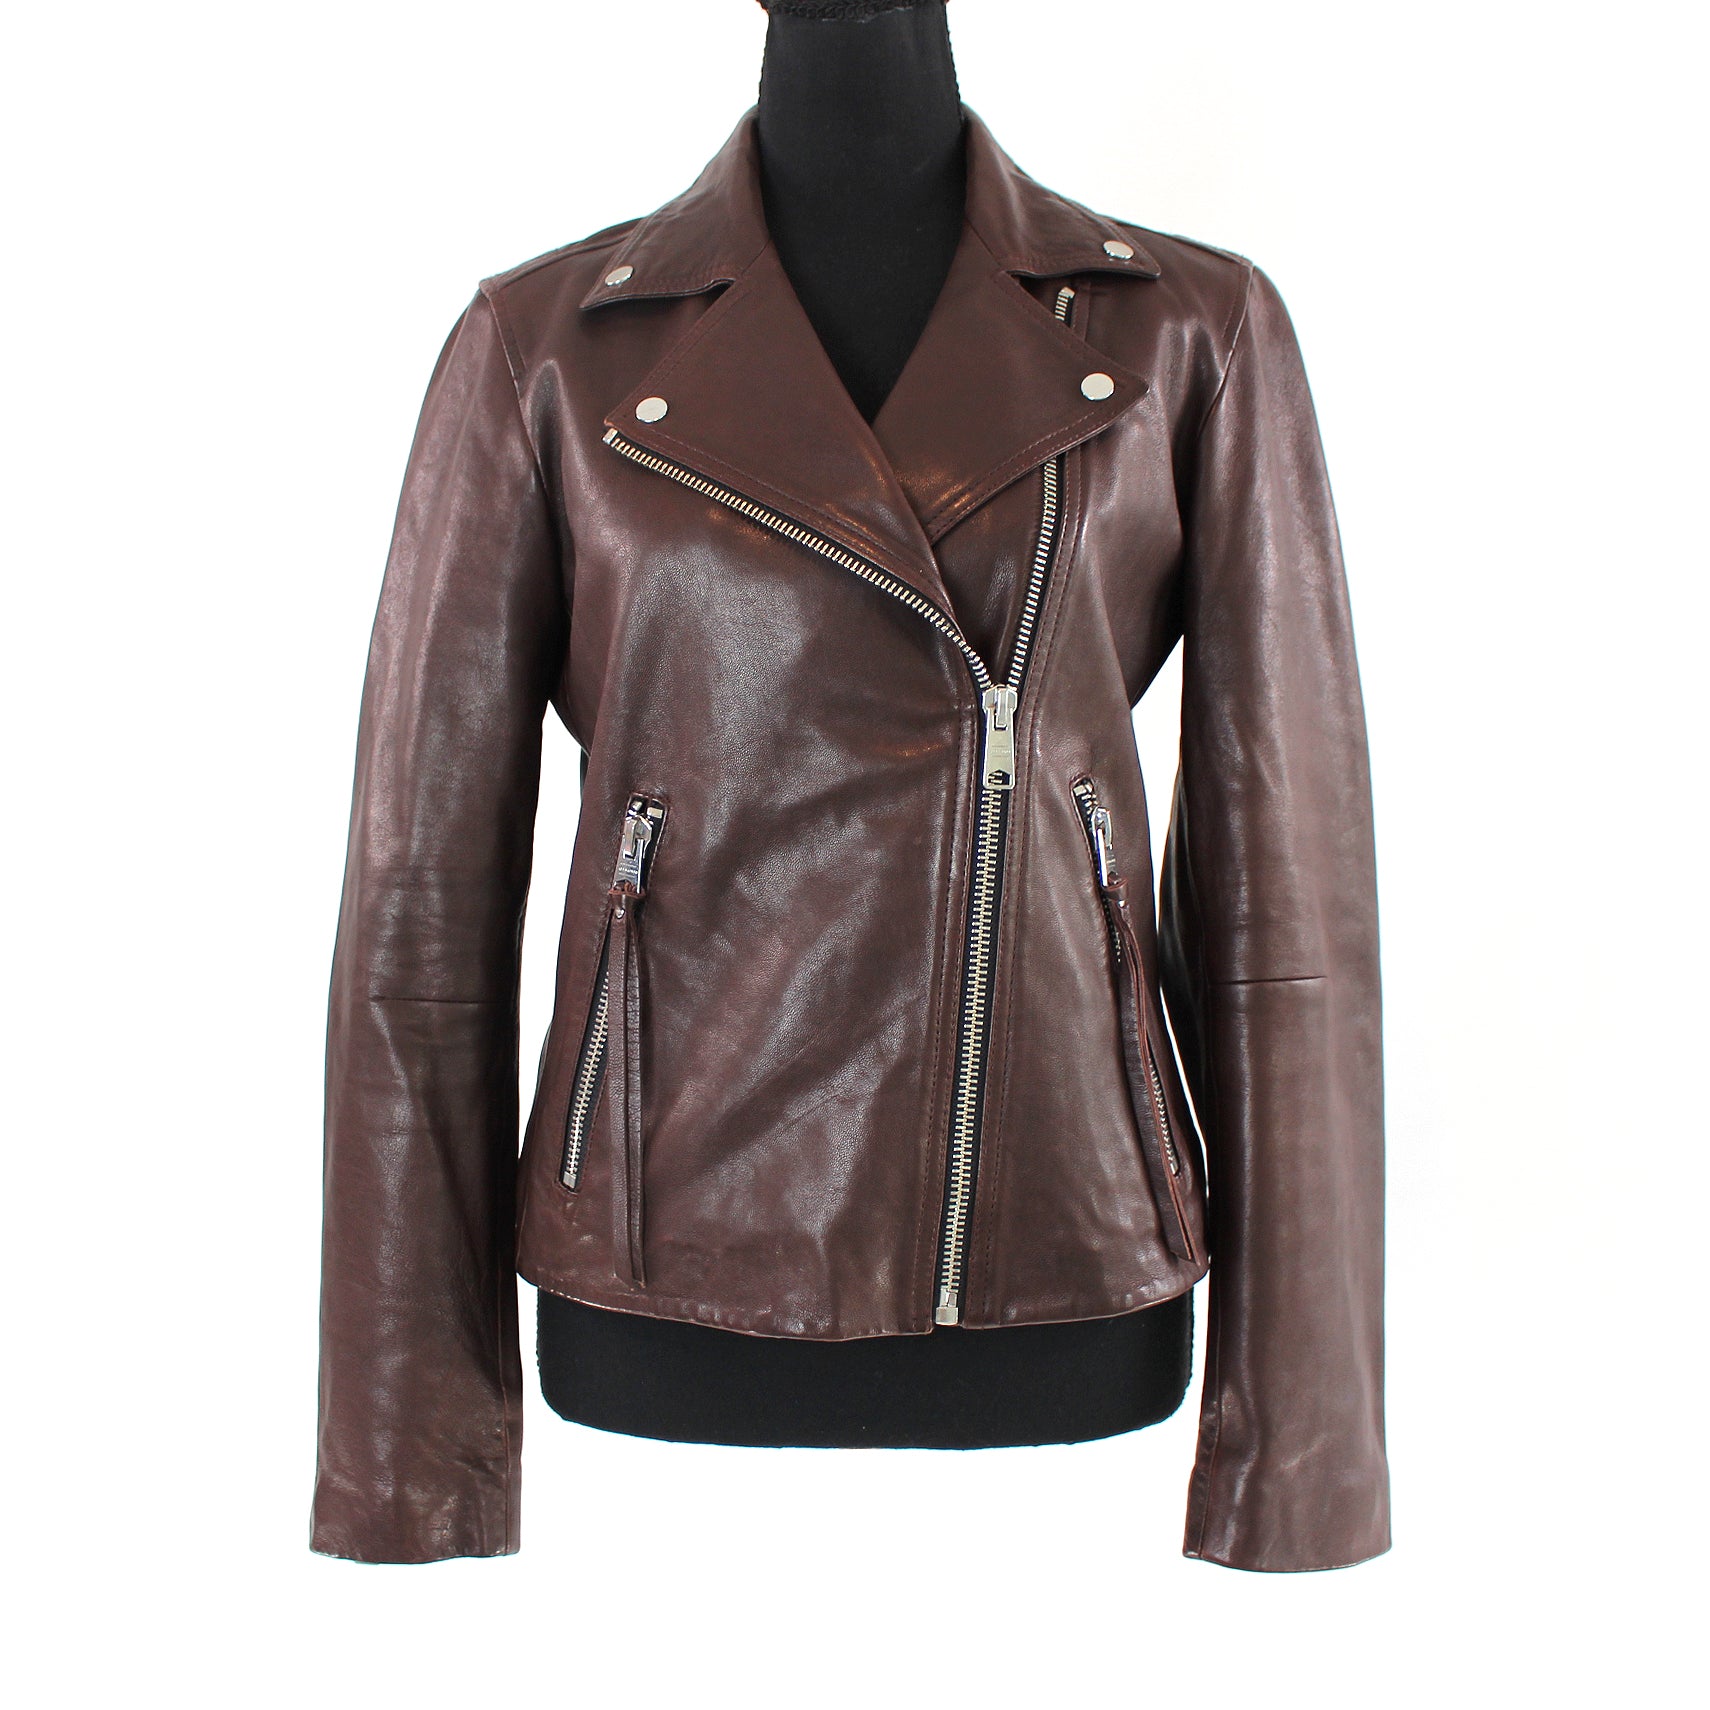 All Oxblood – Zip-Up Brown Saints Dalby Closet Leather The New York Jacket Biker